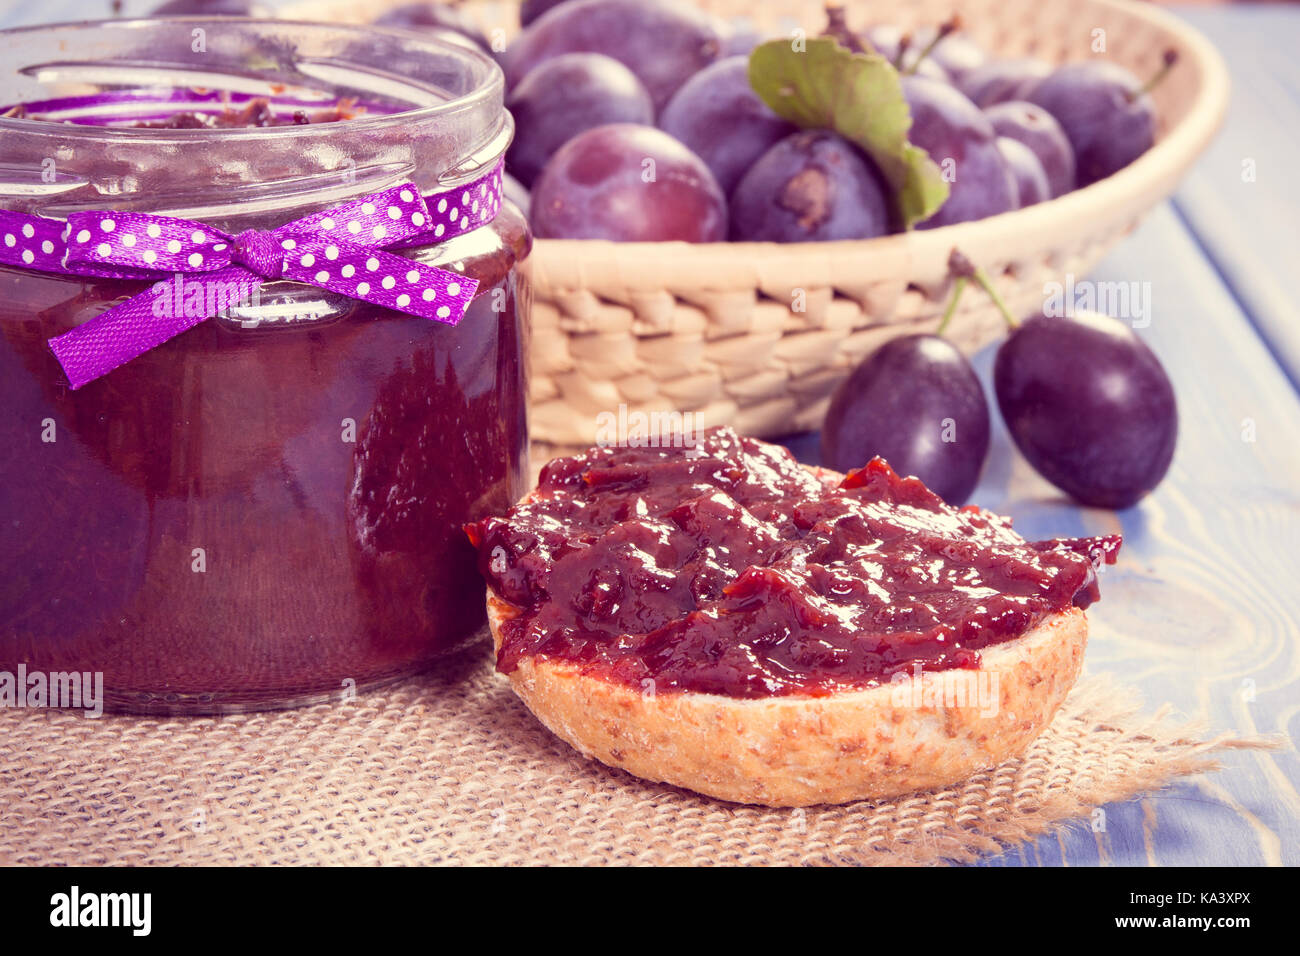 Vintage photo, Fresh prepared sandwiches with plum marmalade or jam, concept of healthy sweet snack, breakfast or dessert Stock Photo